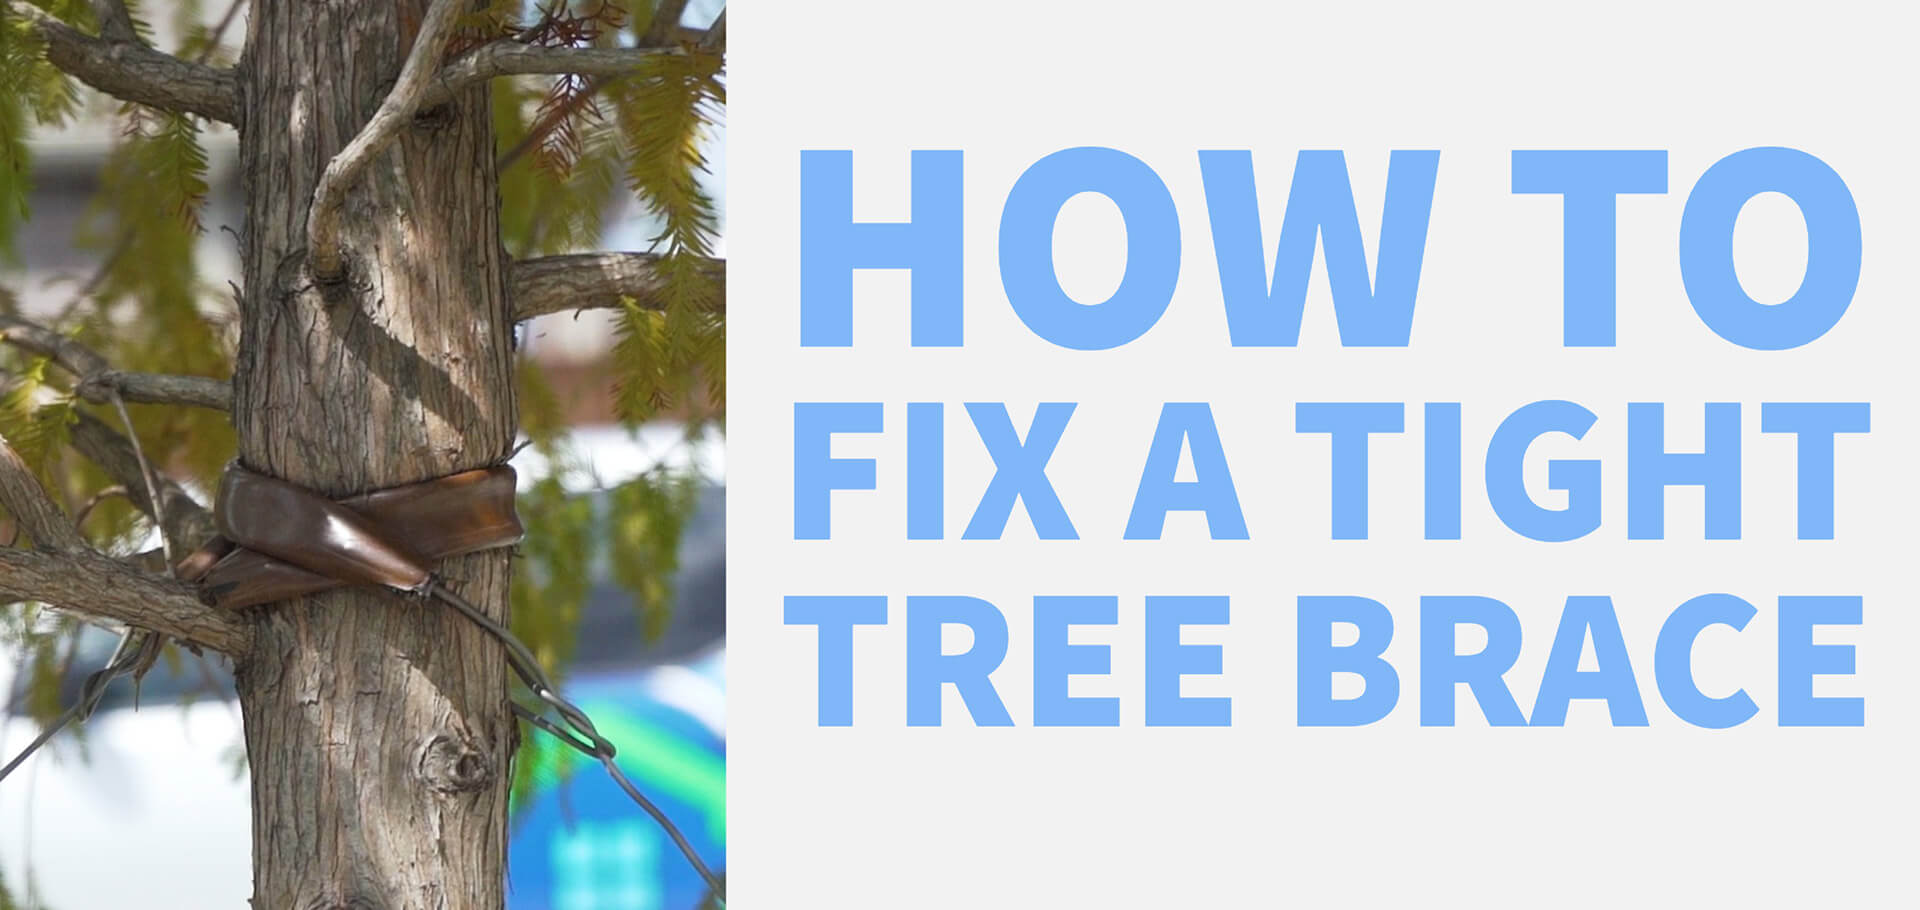 How to maintain tree stakes